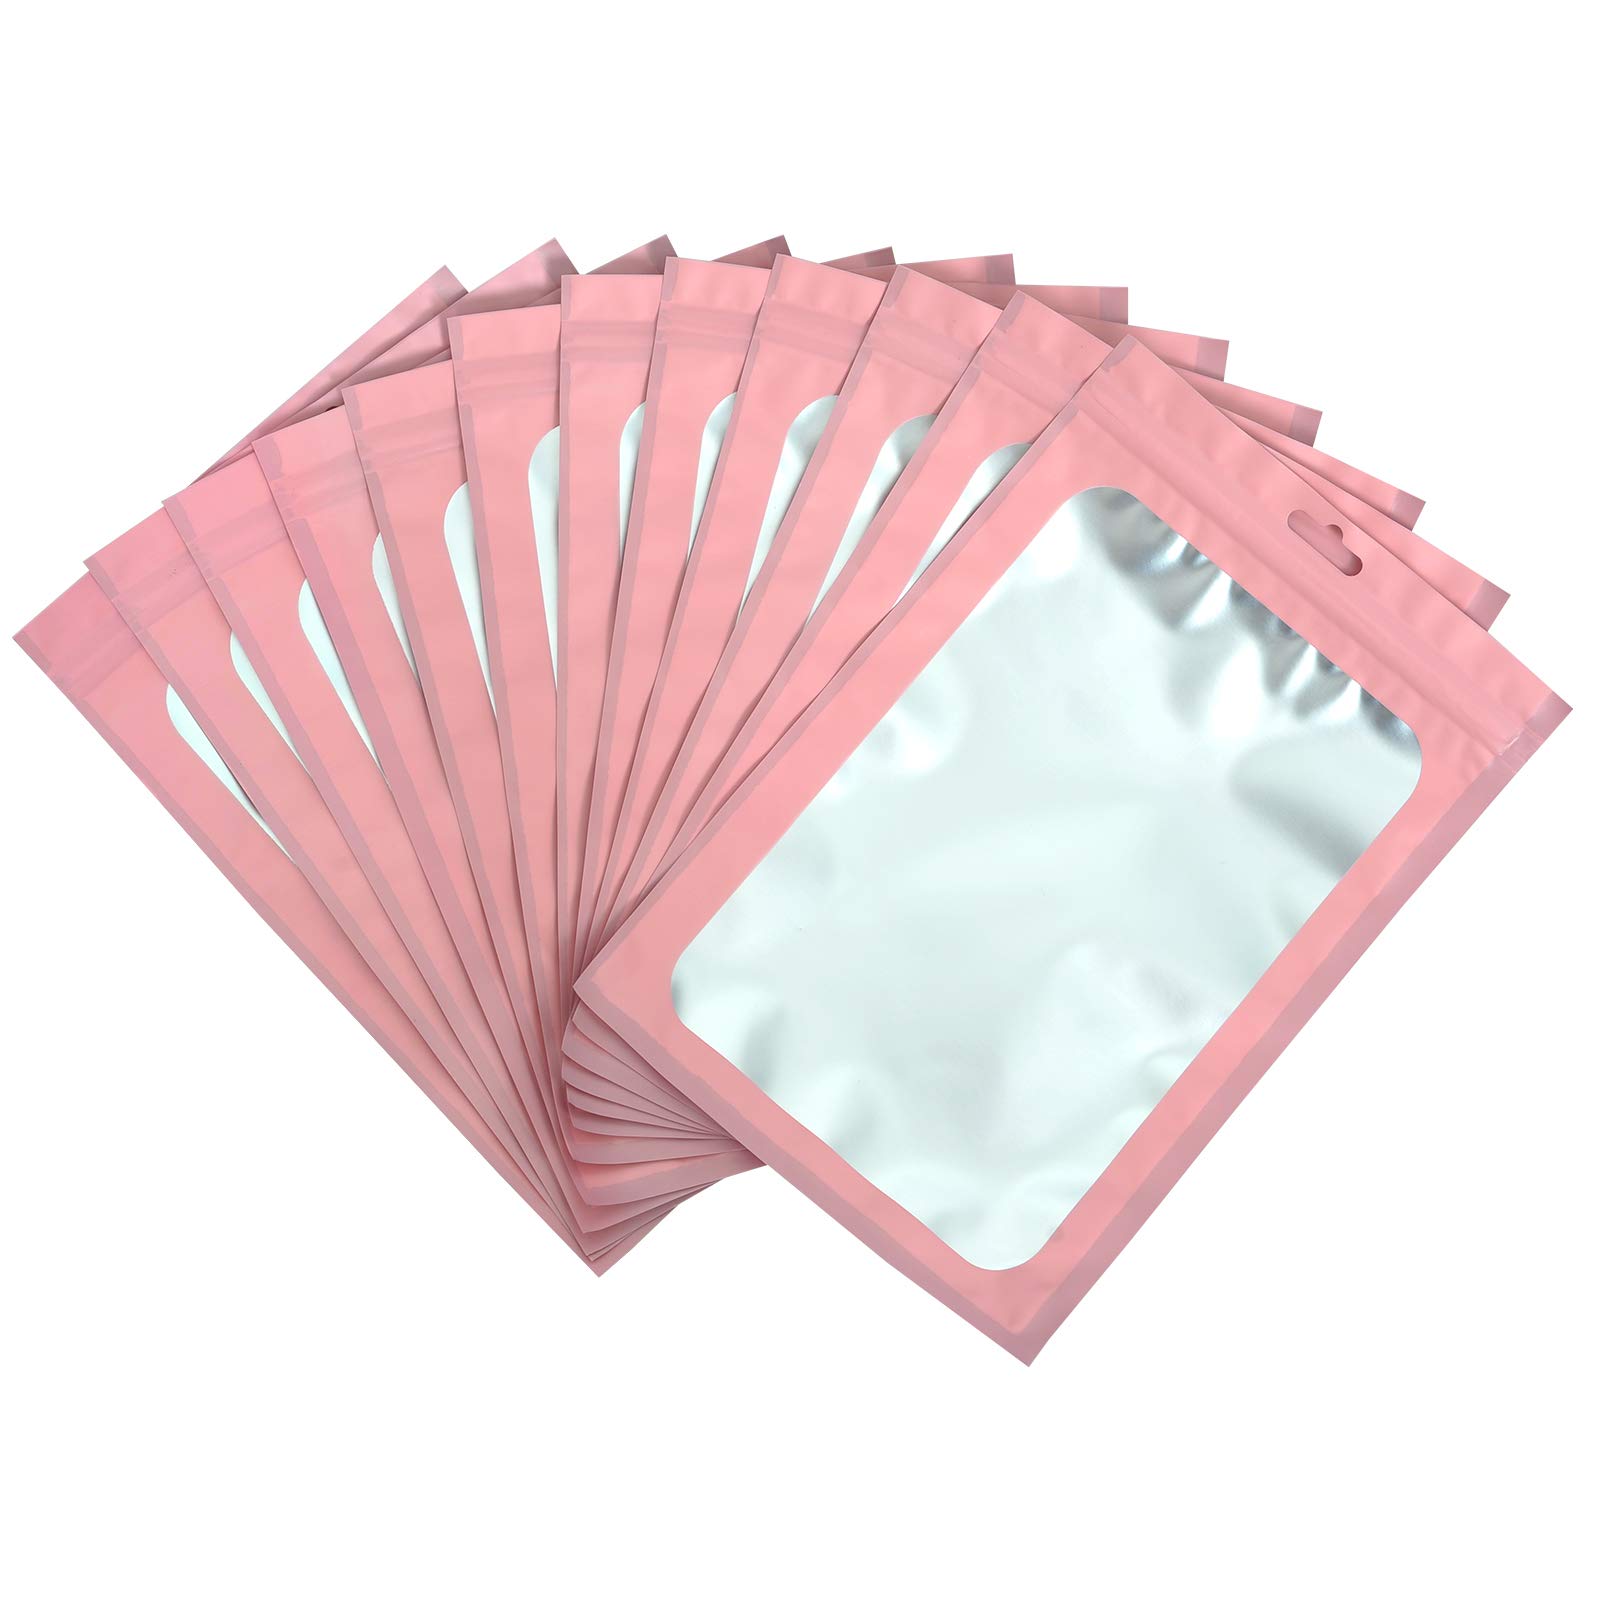 100-pack mylar packaging bags for small business sample bag smell proof  resealable zipper pouch bags jewelry food Lip gloss eyelash phone case  bracelet keychain package supplies etc -front frosted window -cute (Pink